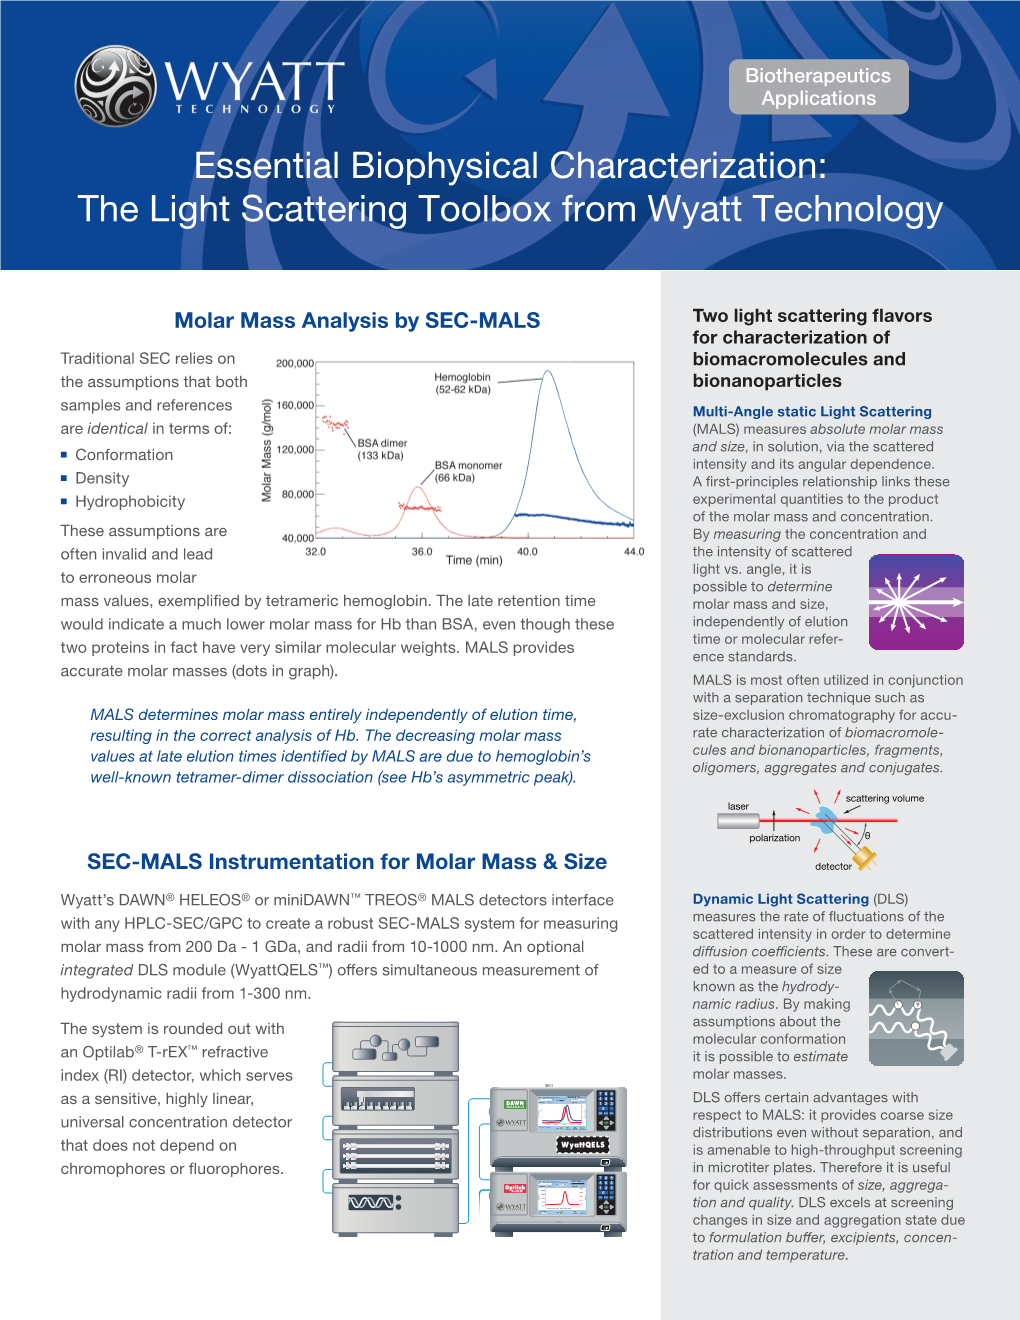 Essential Biophysical Characterization: the Light Scattering Toolbox from Wyatt Technology